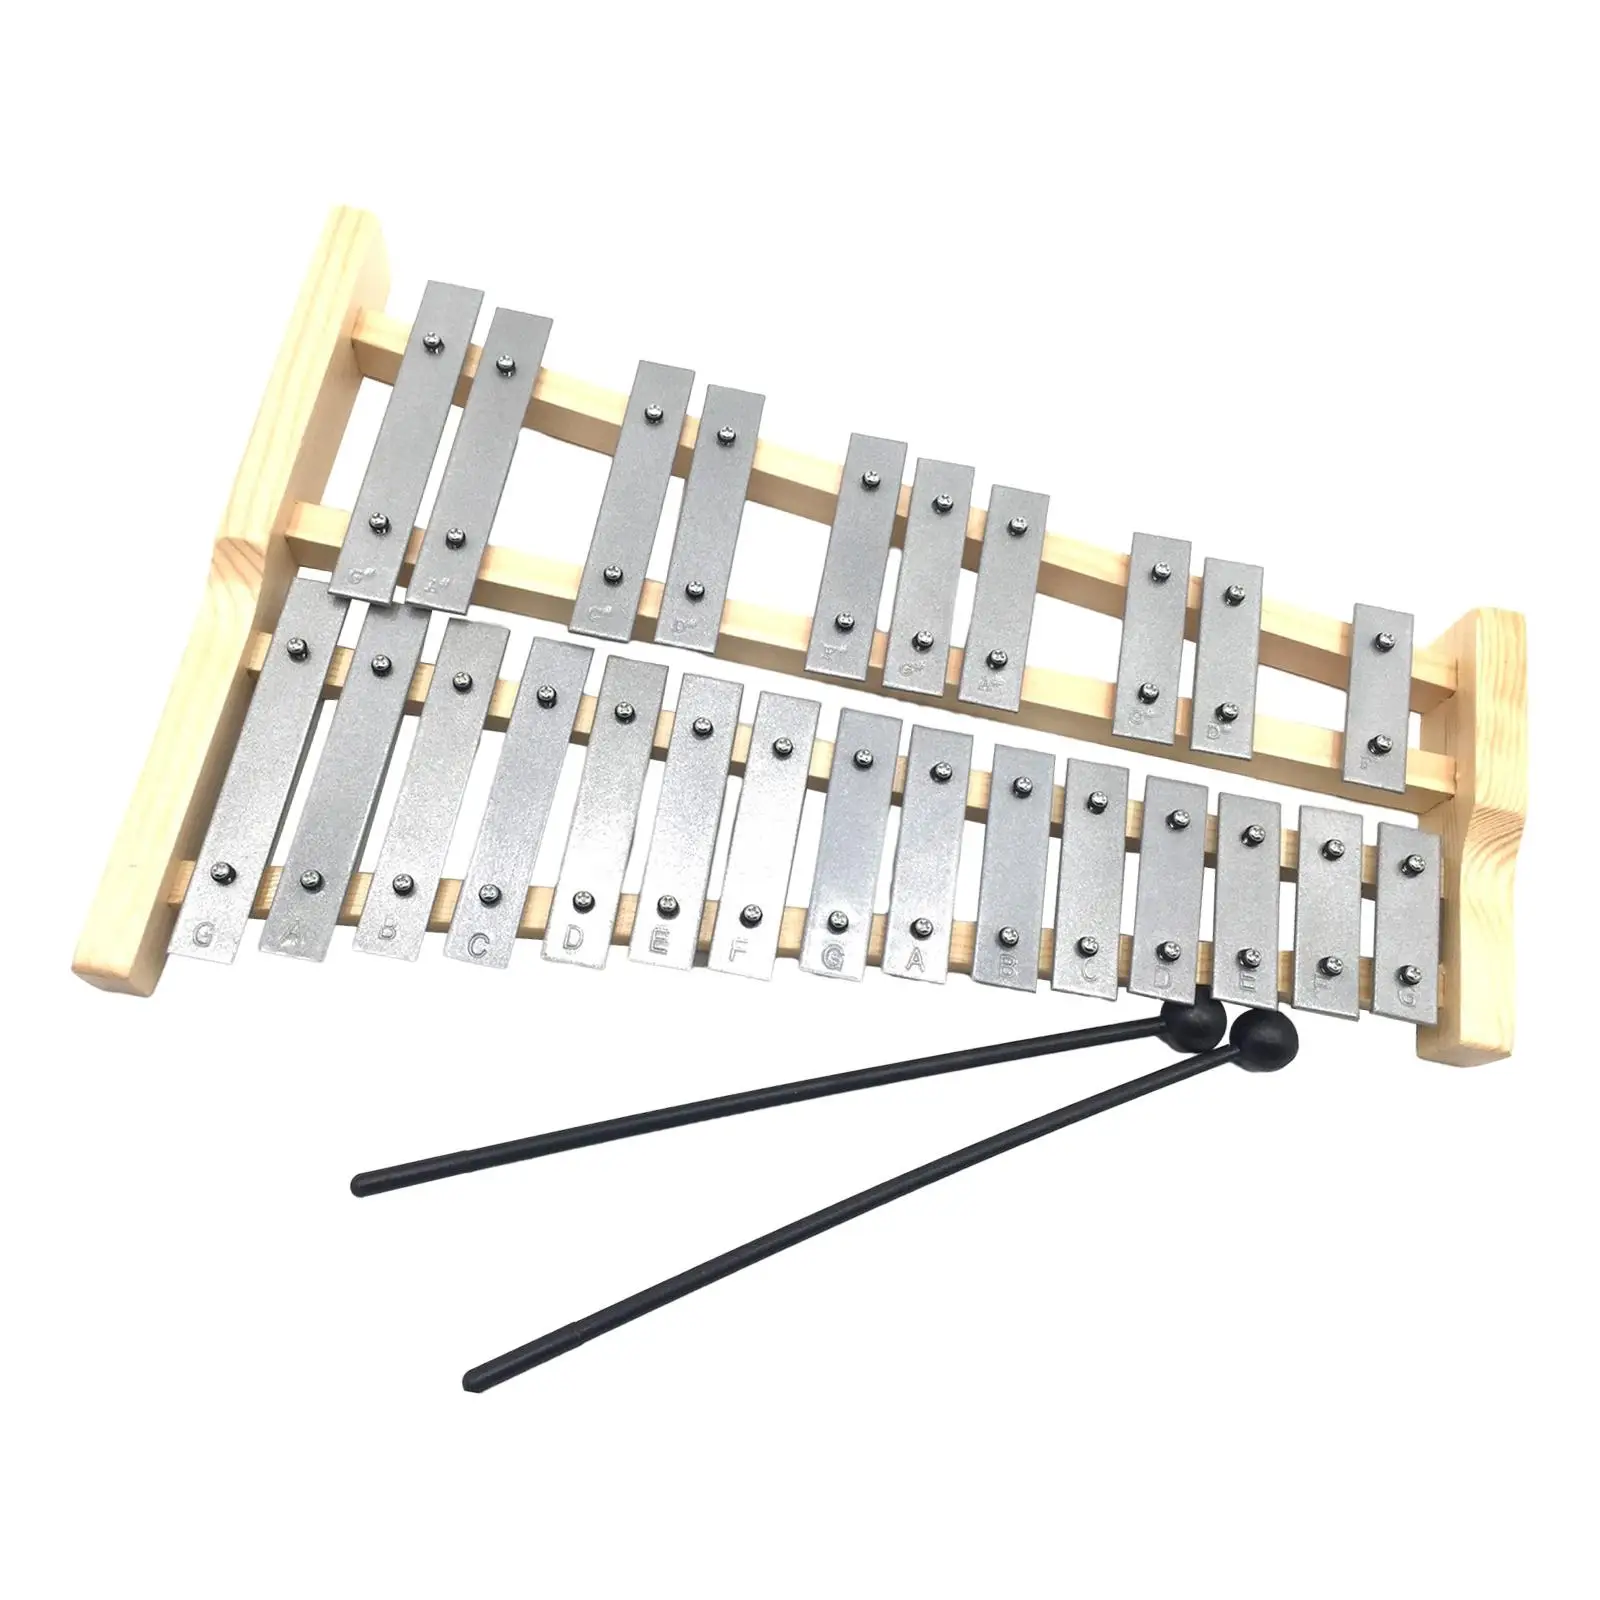 25 Note Glockenspiel Gifts for Kids Adults Compact Aluminum Xylophone Musical Instrument Musical Educational Tuned Glockenspiel